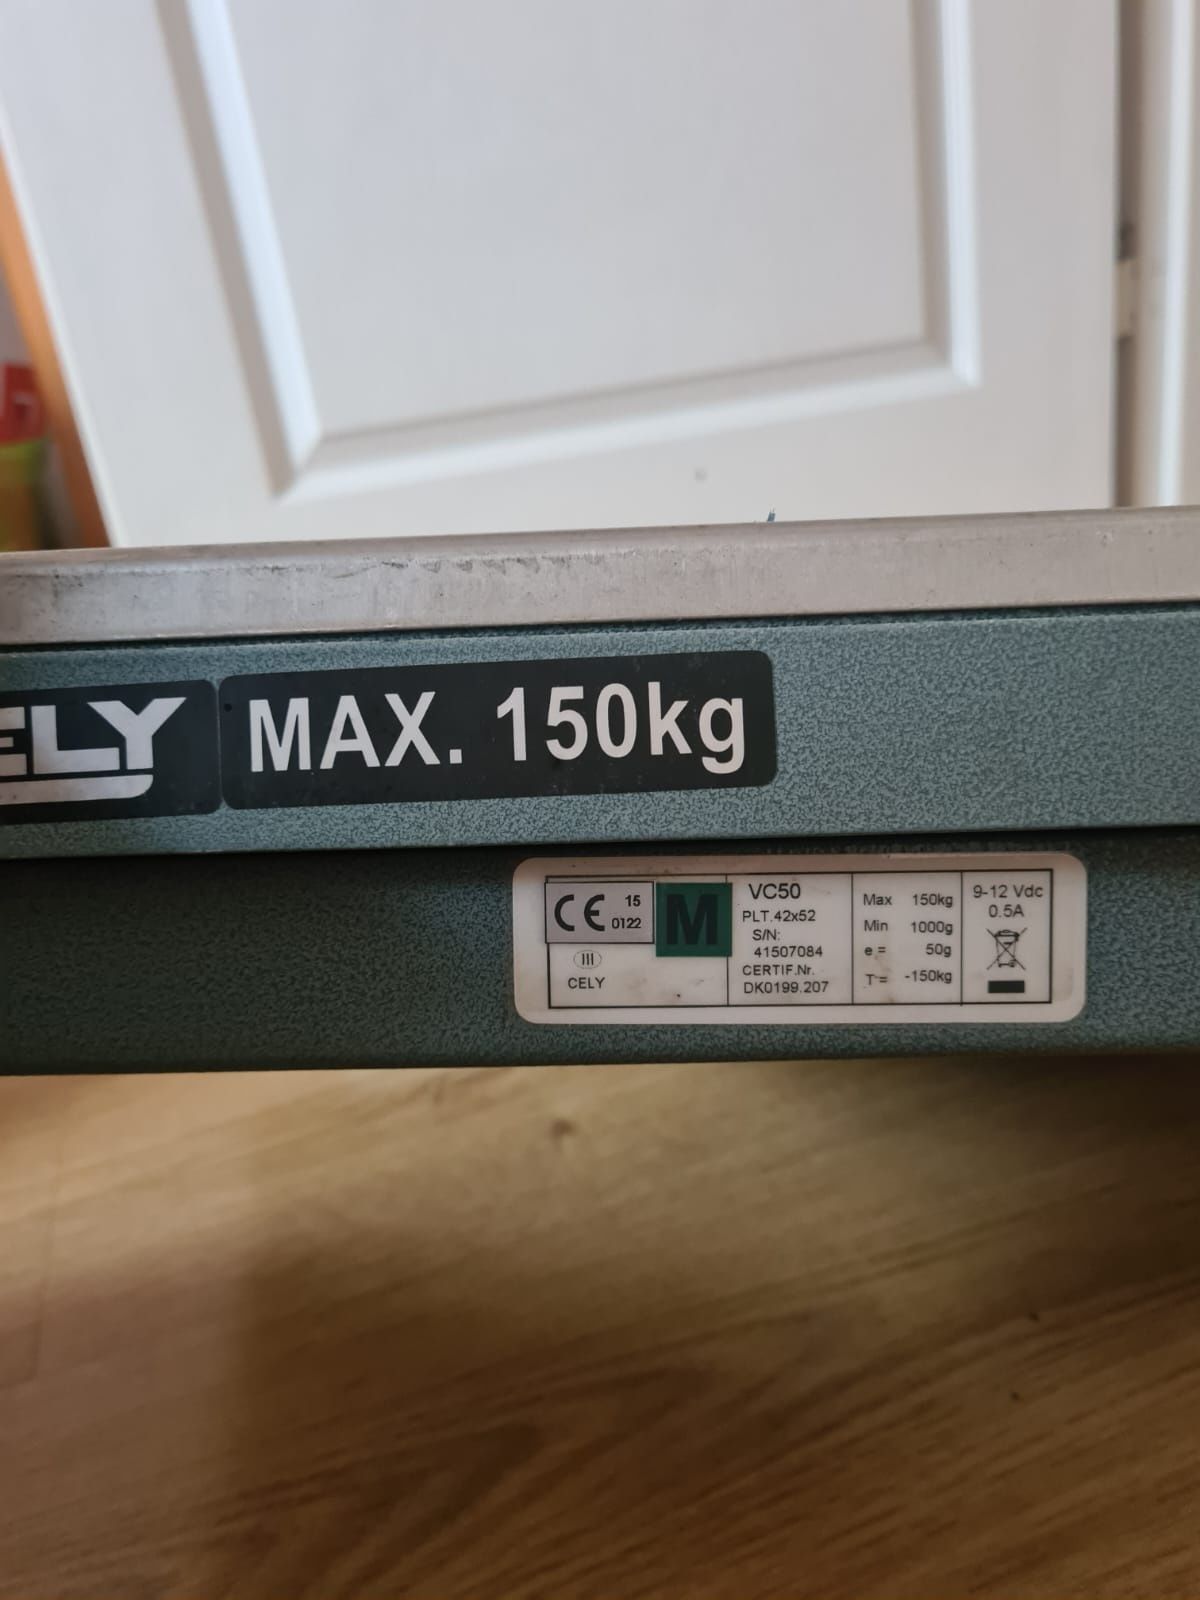 Waga cely vc50 max 150kg